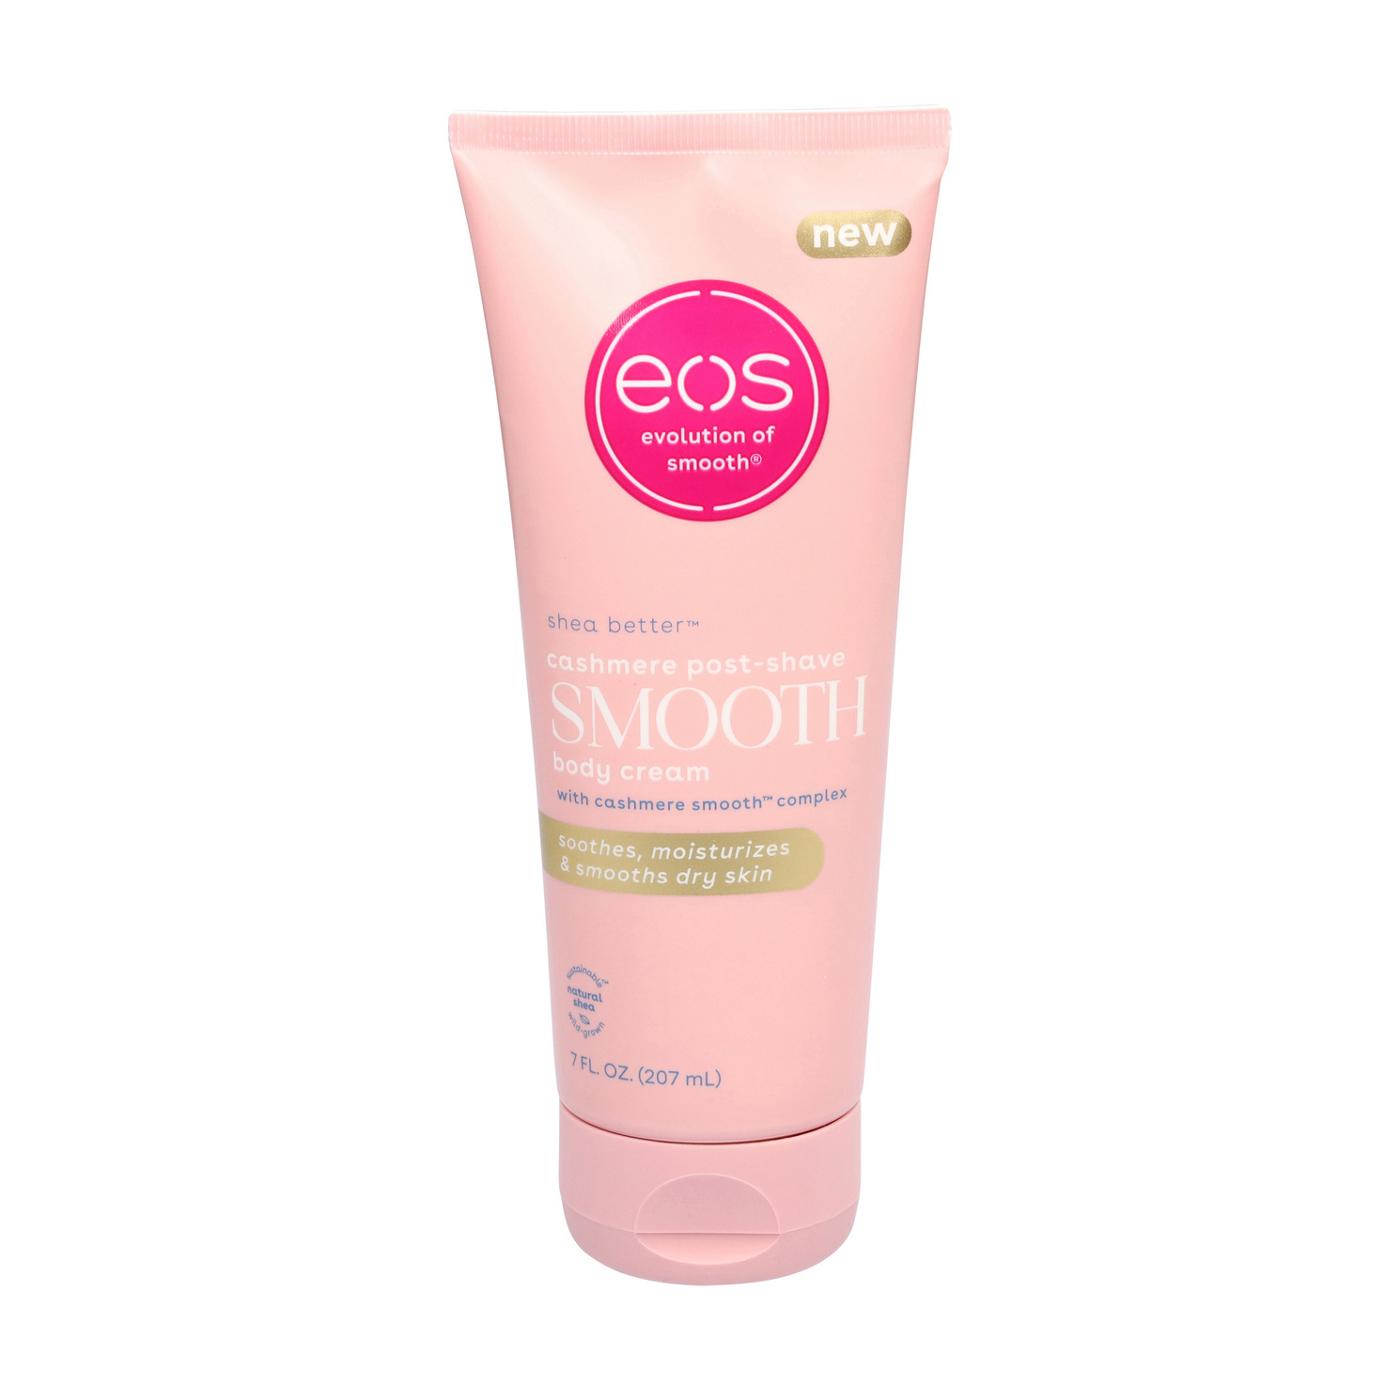 eos Cashmere Post-Shave Smooth Body Cream; image 1 of 2